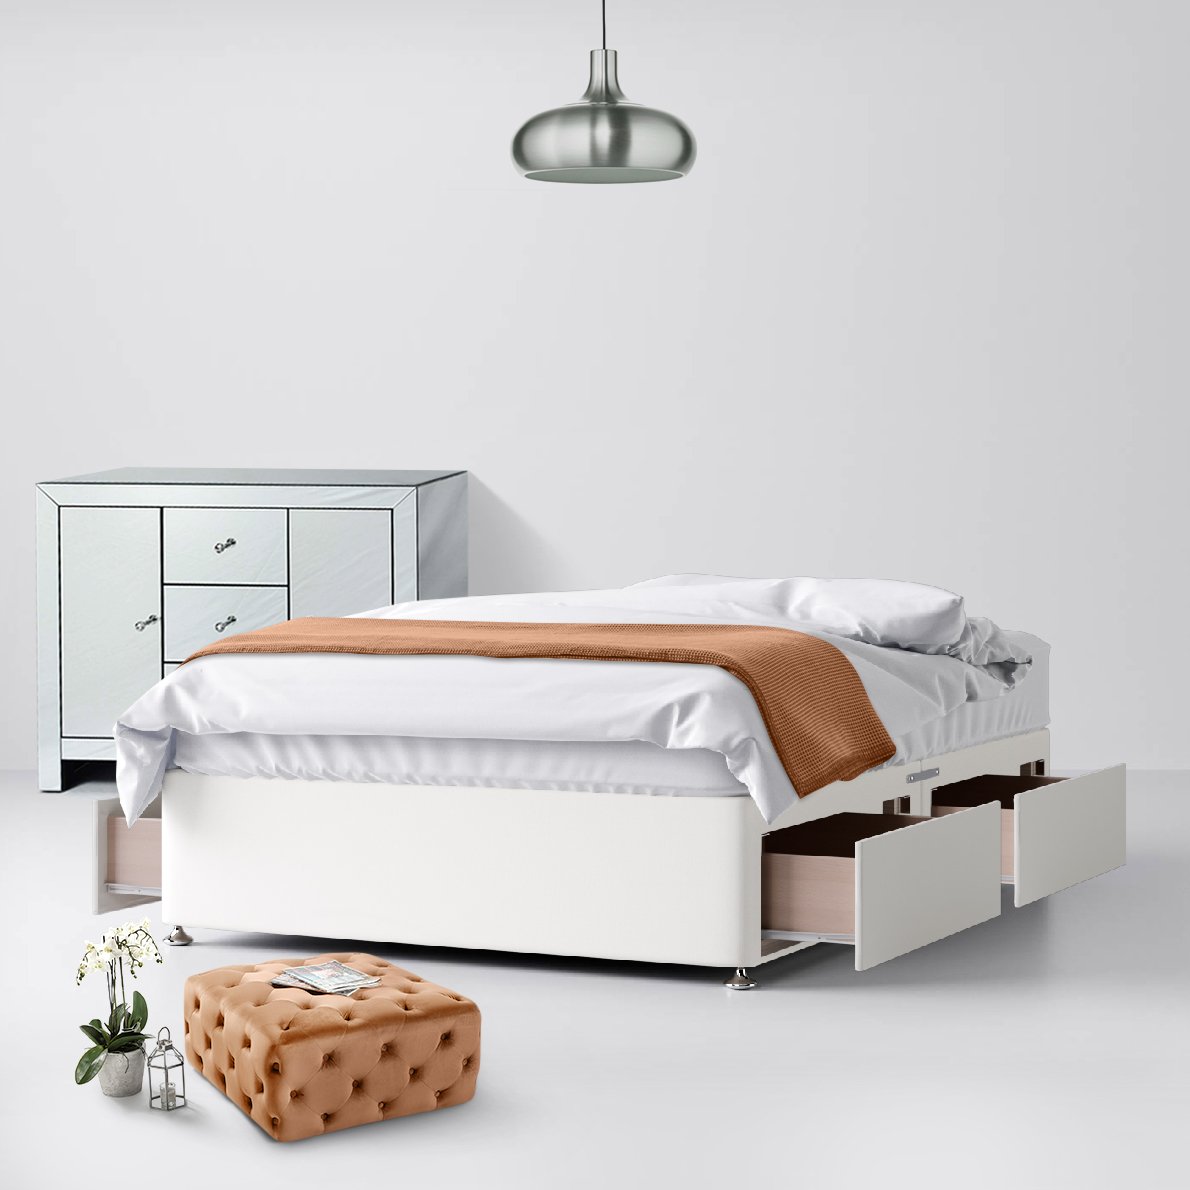 WHITE, 2FT6-0 DRAWS WHITE FABRIC DIVAN BED WITH MEMORY FOAM MATTRESS FREE HEADBOARD STORAGE DRAWERS by Luxurious Nights. 